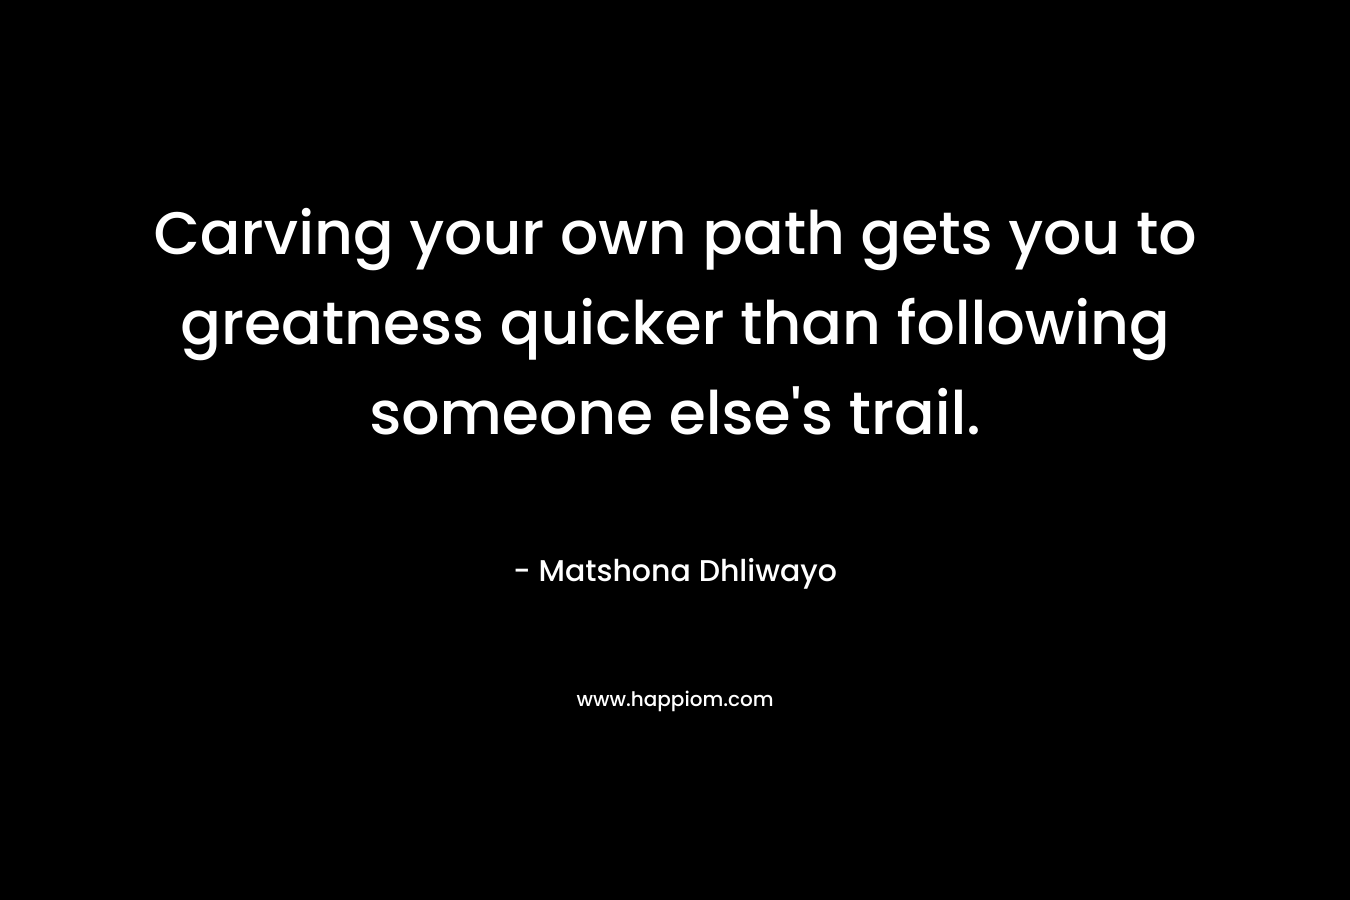 Carving your own path gets you to greatness quicker than following someone else’s trail. – Matshona Dhliwayo